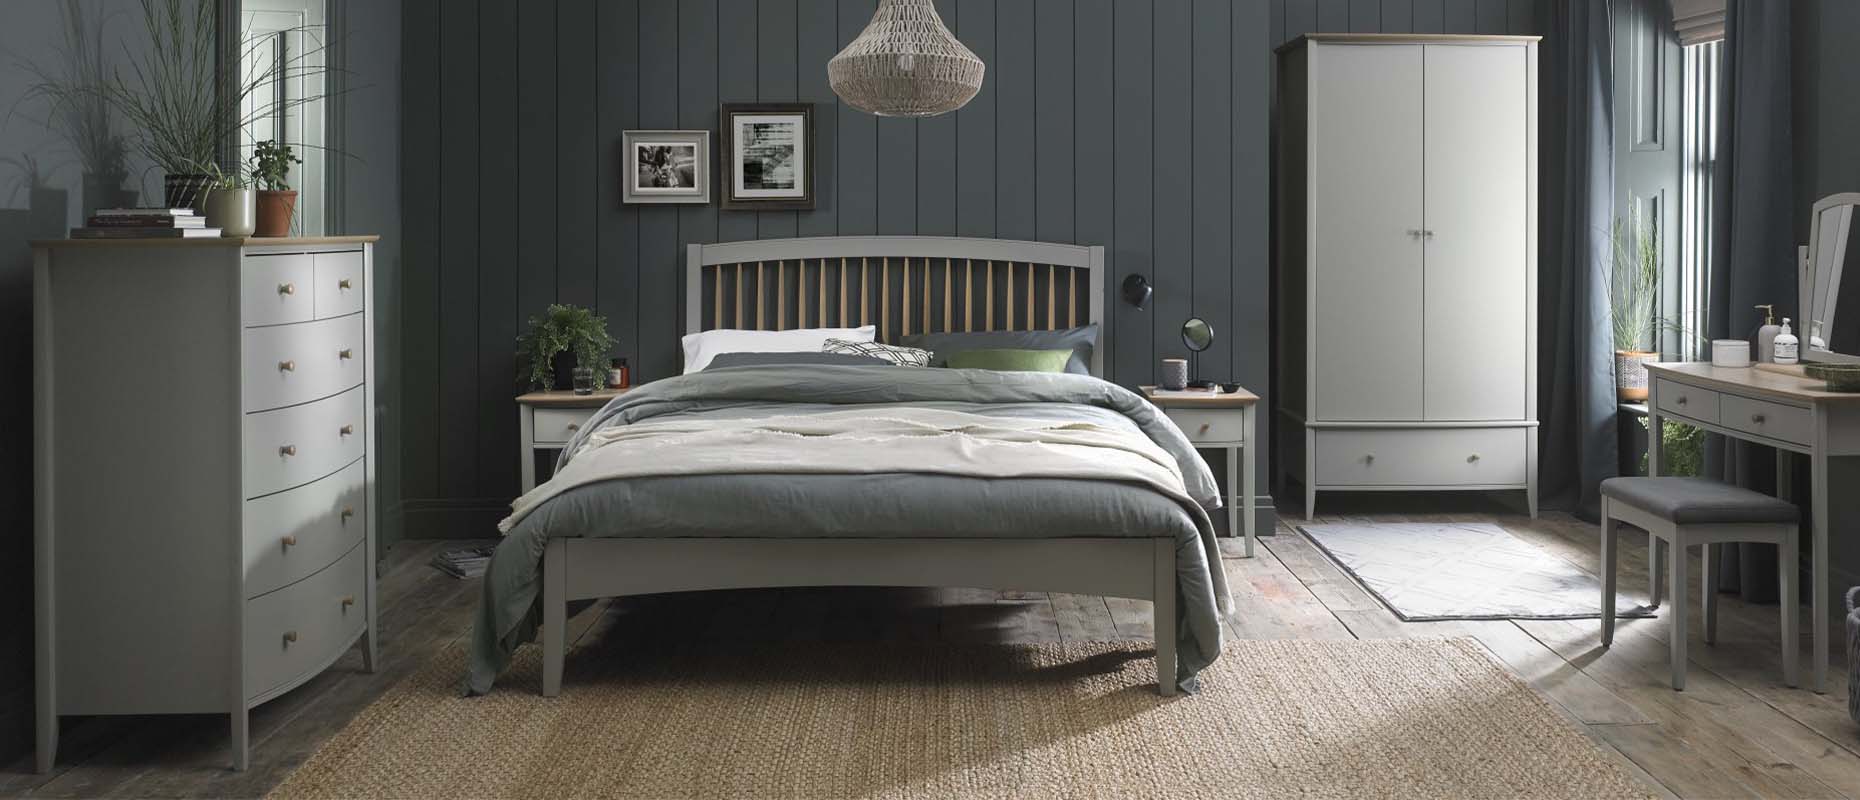 Tuva bedroom collection at Forrest Furnishing